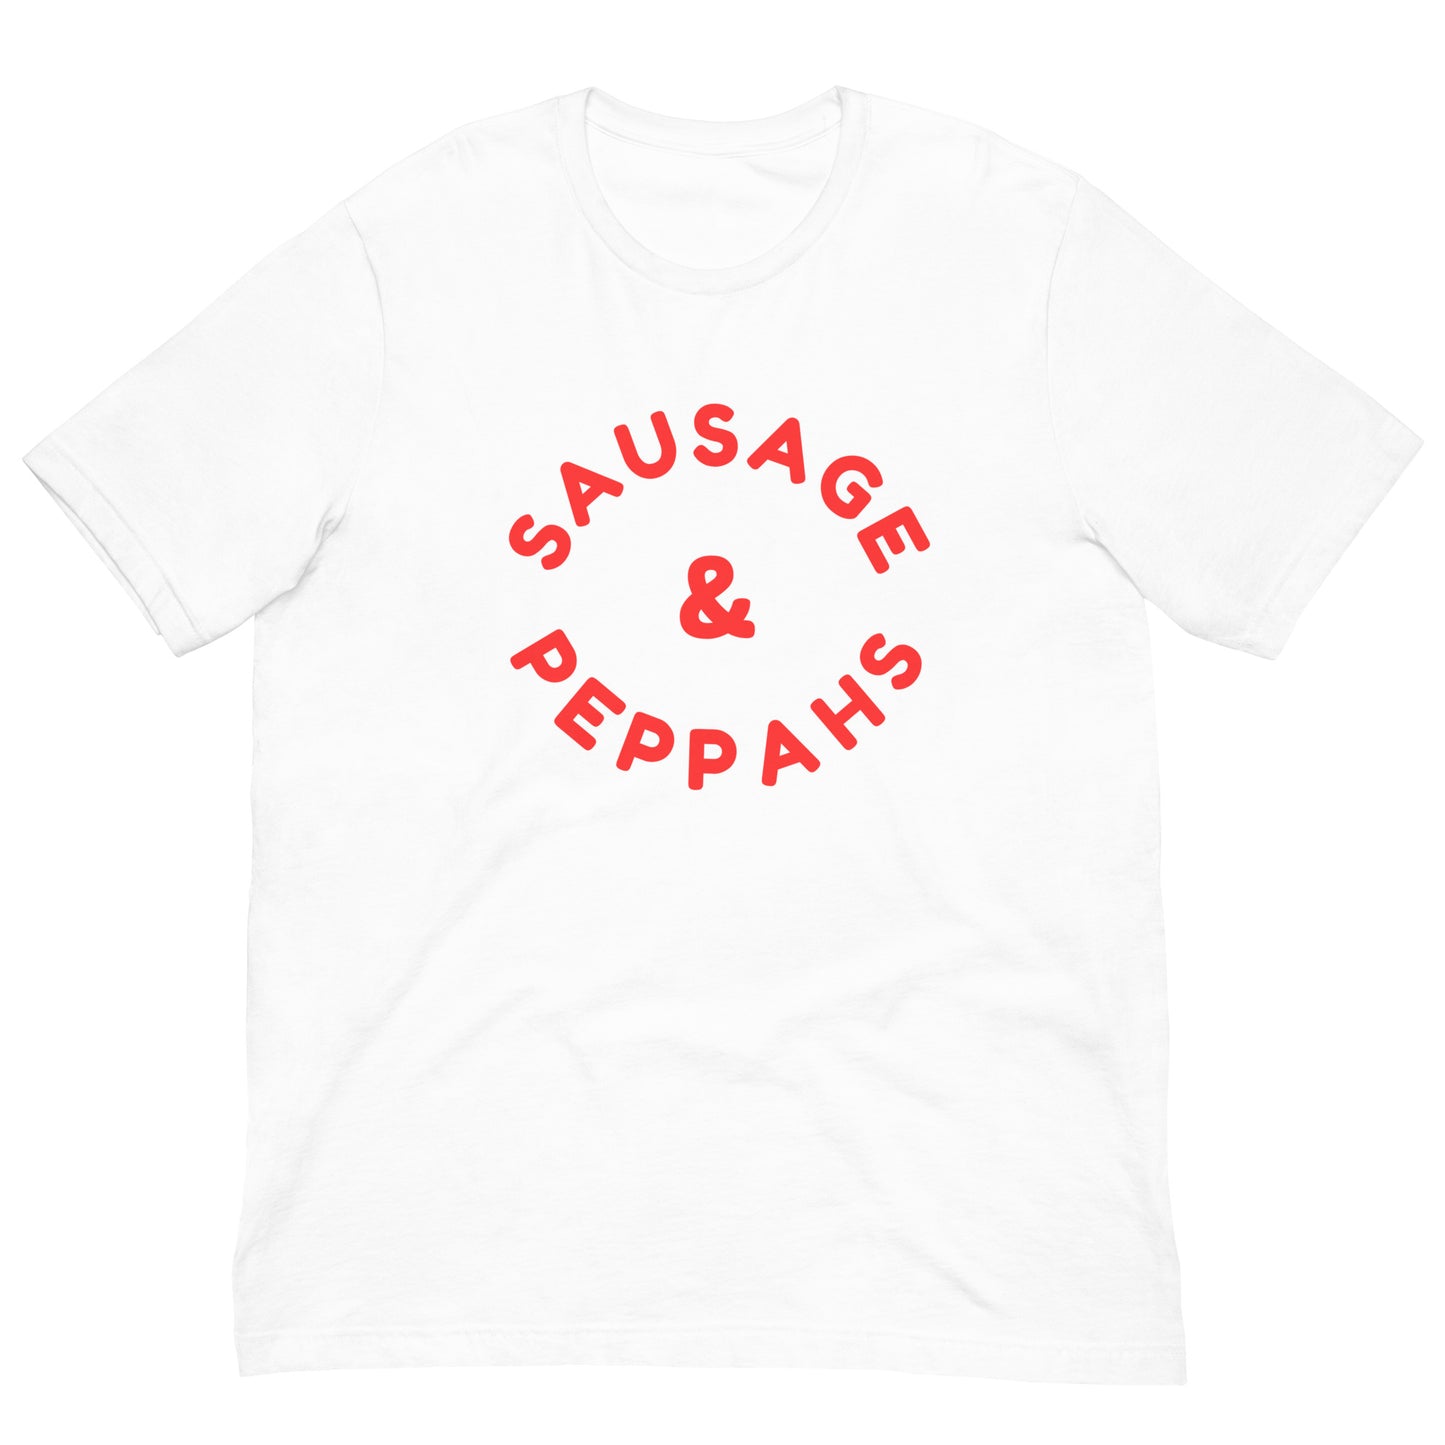 white tshirt that says "sausage and peppahs" in red lettering